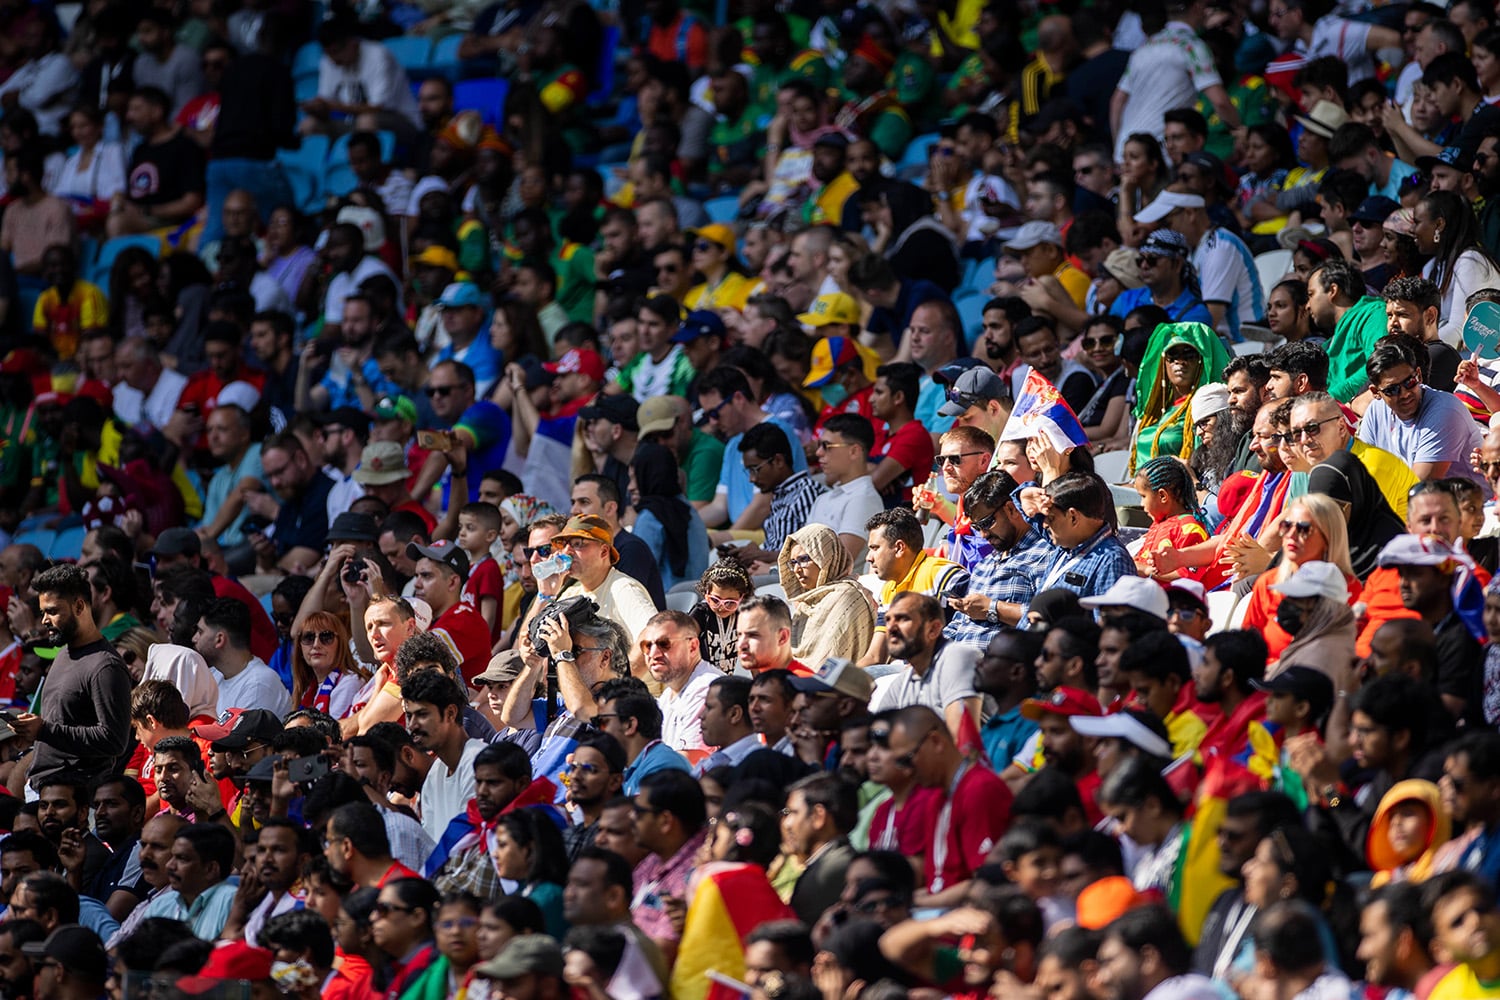 Fans watch World Cup match from stands